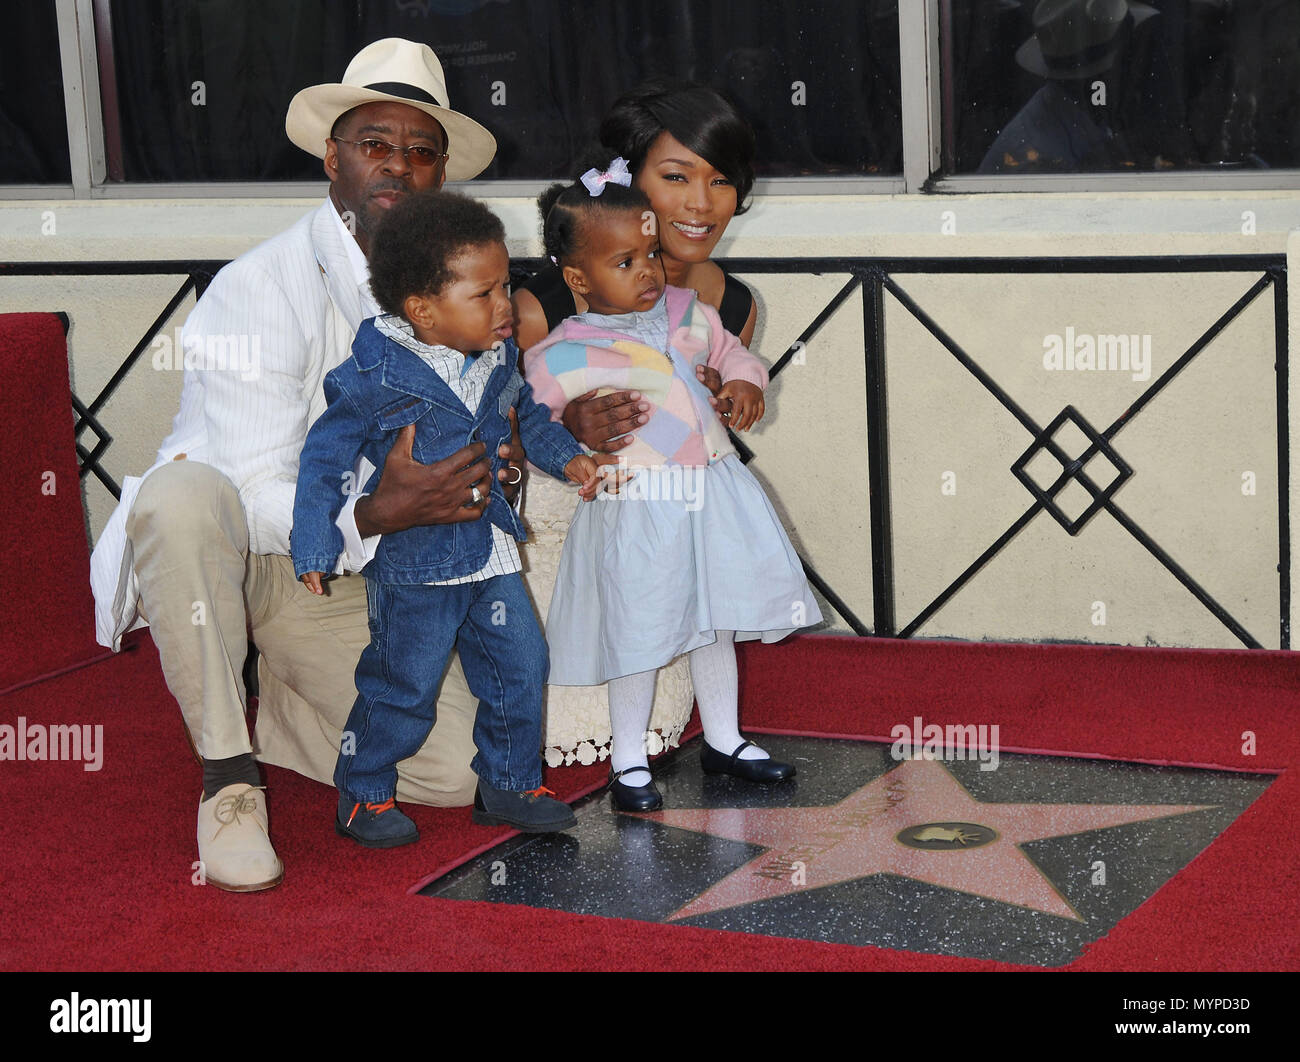 Angela Bassett, Courtney Vance, Bronwyn Golden and Slater Josiah, -  Angela Bassett Honored with a Star on the Hollywood Walk Of Fame In Los Angeles.  family picture full length eye contact smile 03 BassettAngela VanceC kids 03  Event in Hollywood Life - California, Red Carpet Event, USA, Film Industry, Celebrities, Photography, Bestof, Arts Culture and Entertainment, Celebrities fashion, Best of, Hollywood Life, Event in Hollywood Life - California, Red Carpet and backstage, Music celebrities, Topix, Couple, family ( husband and wife ) and kids- Children, brothers and sisters inquiry tsuni@Ga Stock Photo